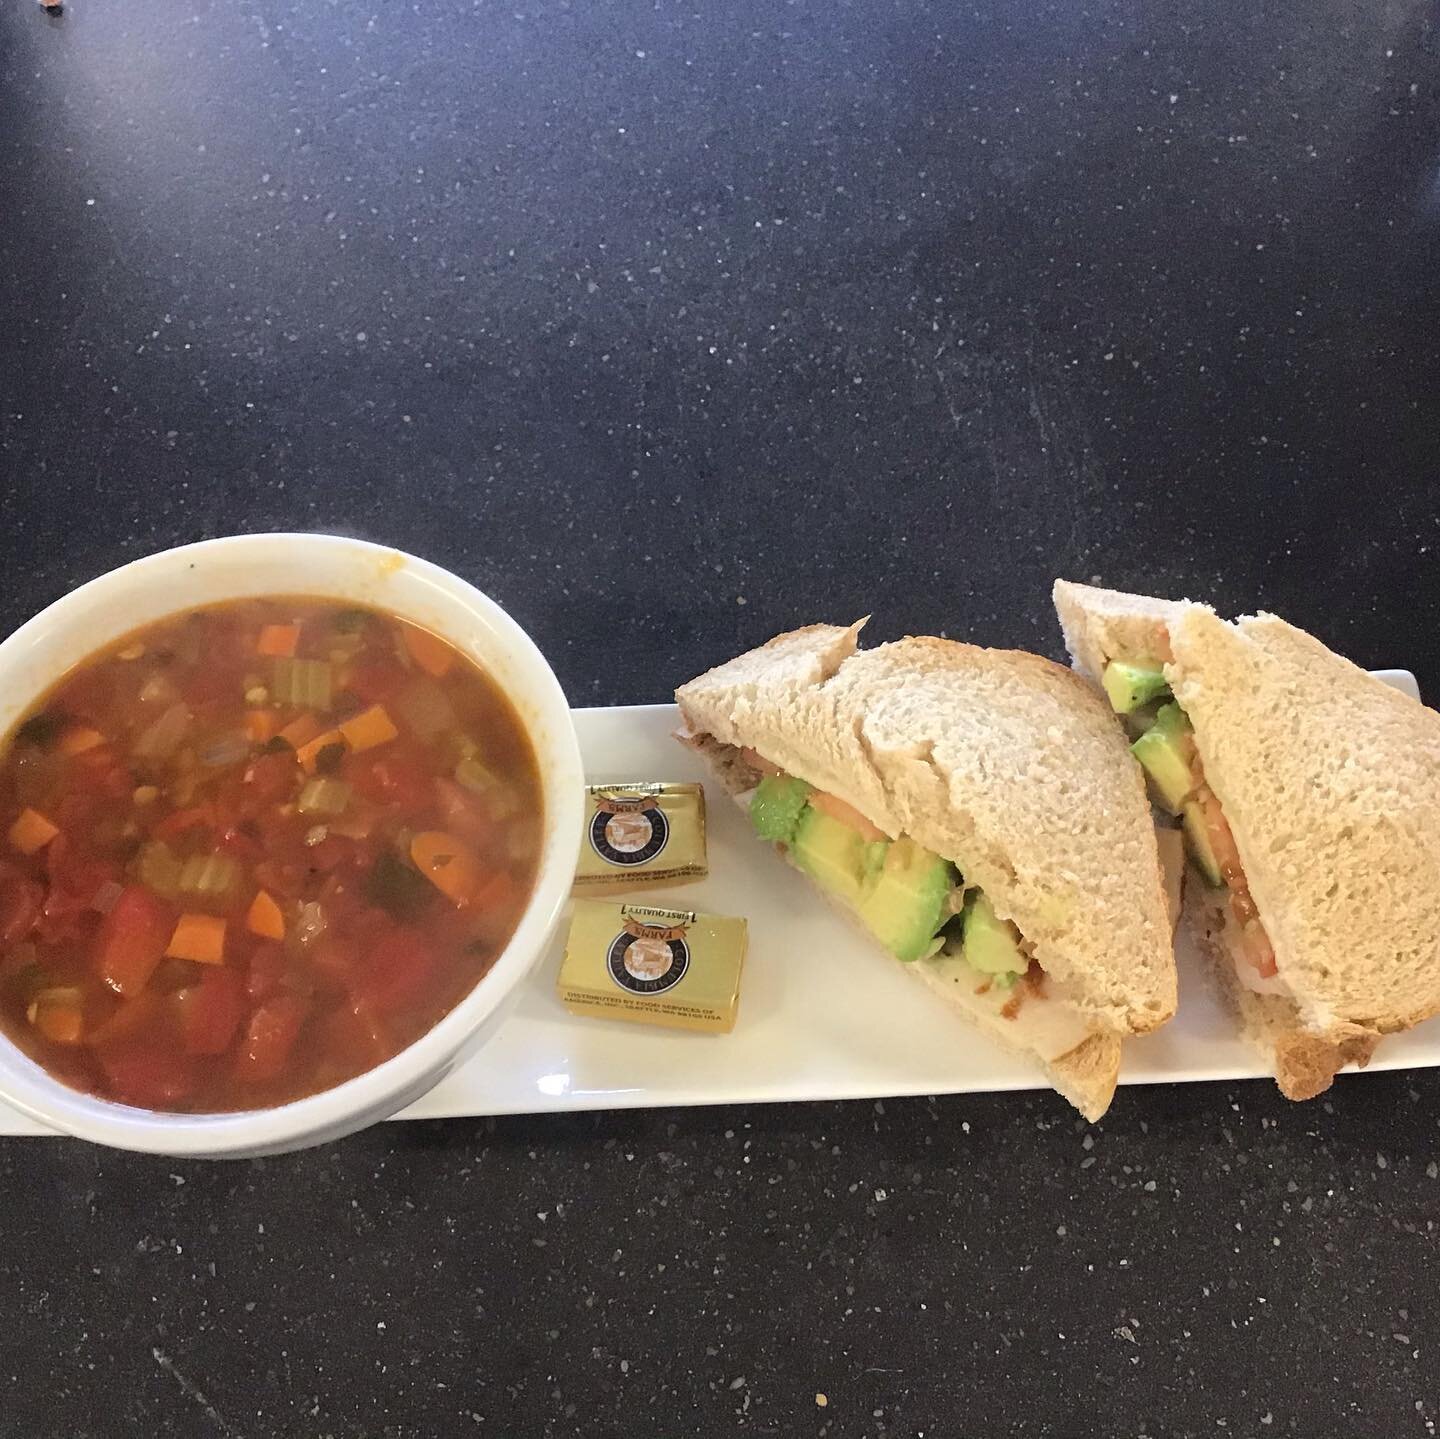 Good morning!😃
Come on in and grab a bowl to go of our French lentil soup and pair it with one of our yummy sandwiches🤤
And of course save some room for a sweet treat, try out our strawberry citrus cheesecake!
Hope you all have a wonderful week!😁